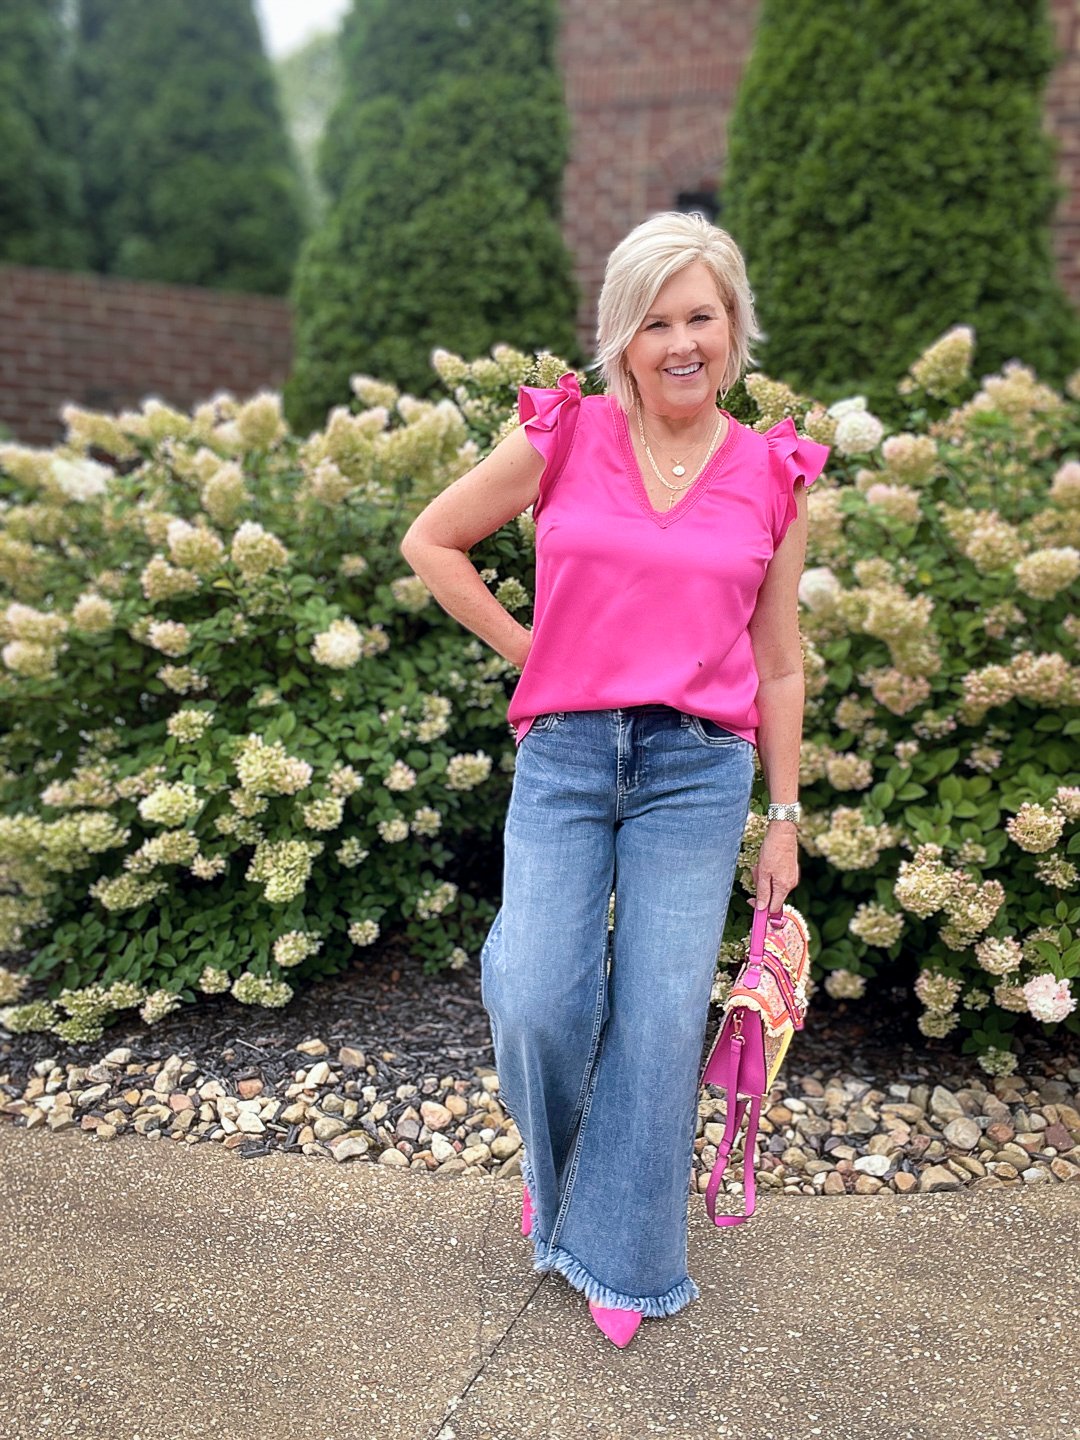 Over 40 Fashion Blogger, Tania Stephens is styling wide leg jeans with a pink ruffled top7